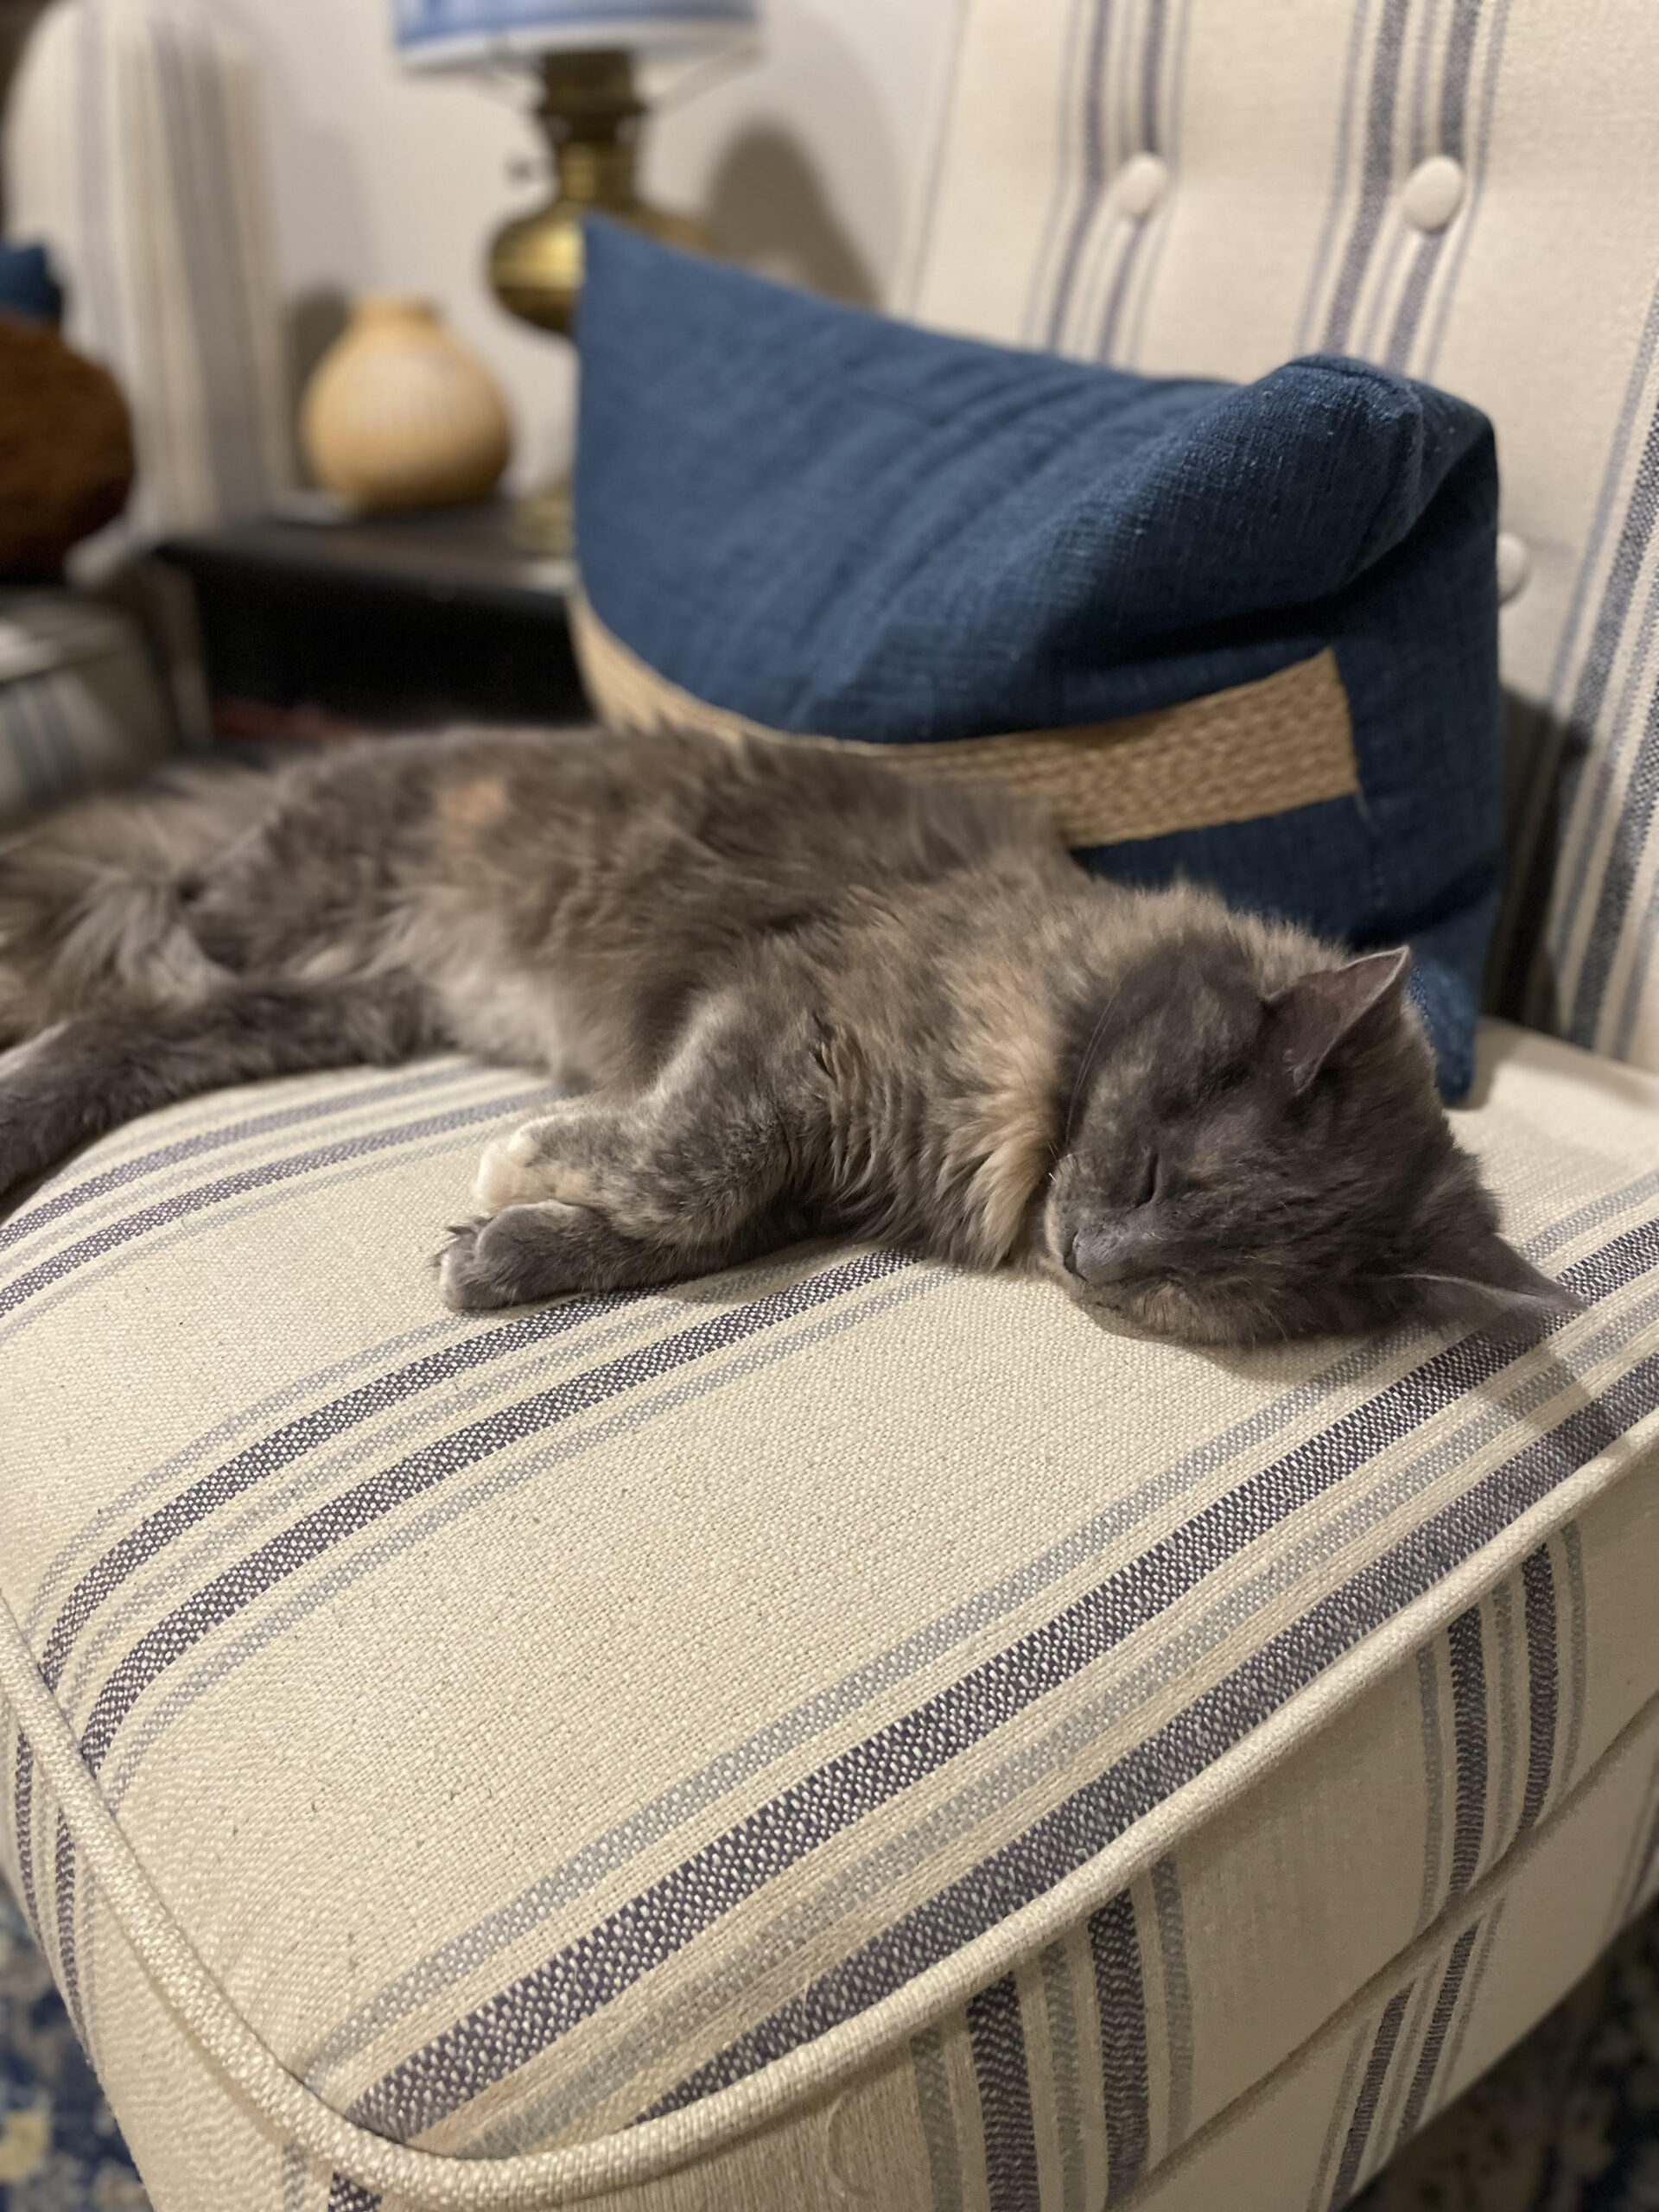 A grey cat lays sleeping on a striped chair in her home.